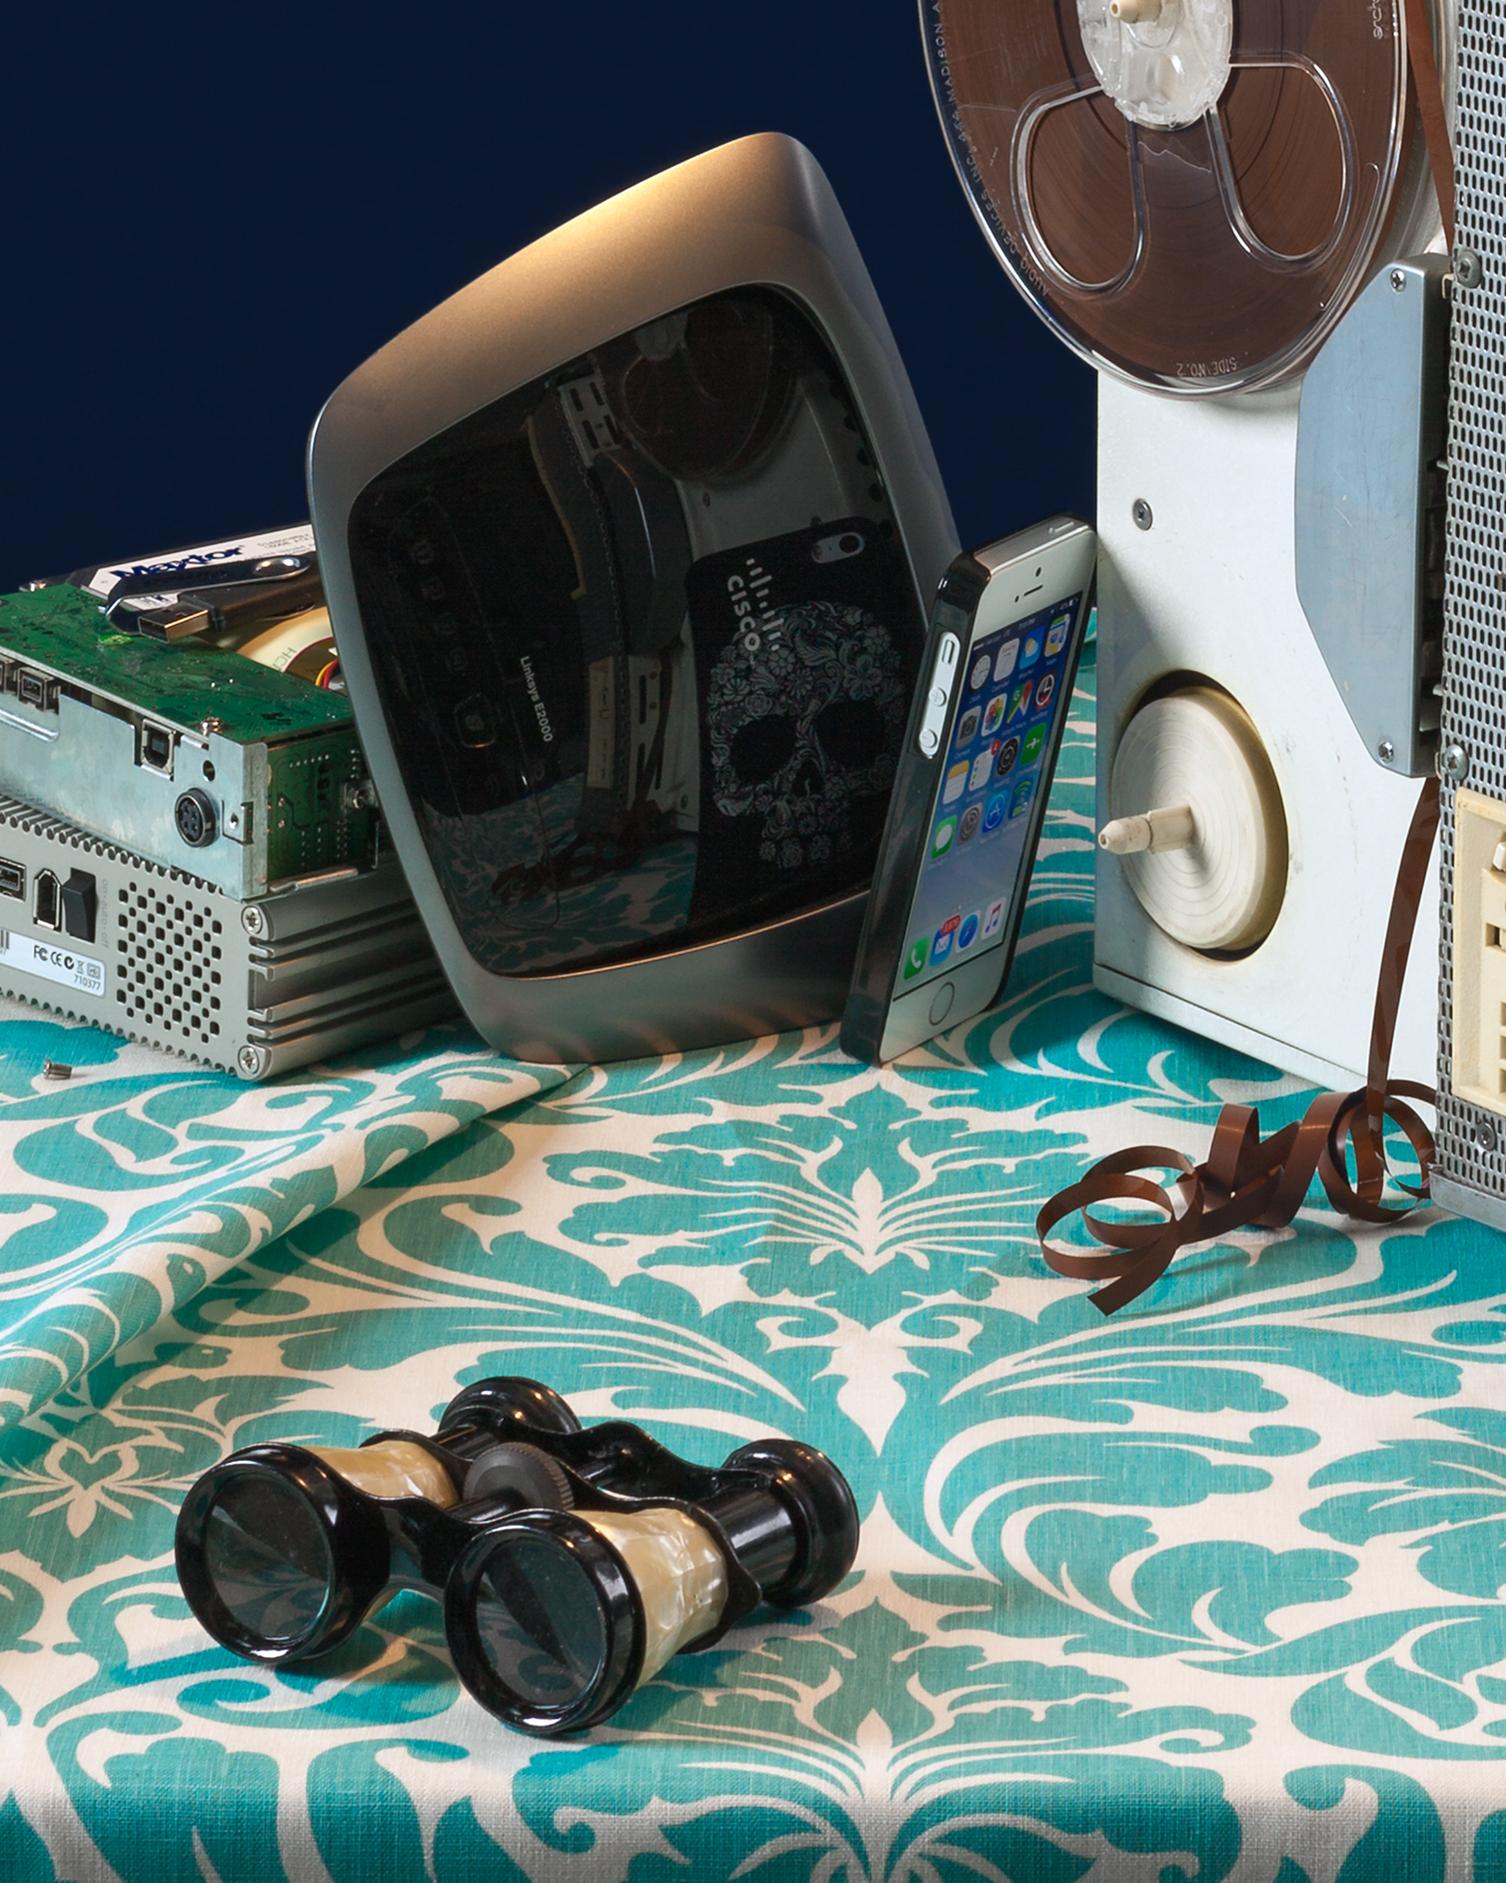 “Tech Vanitas: Reel to Reel” Contemporary Still-life Photo of Vintage Tech - Black Still-Life Photograph by Jeanette May